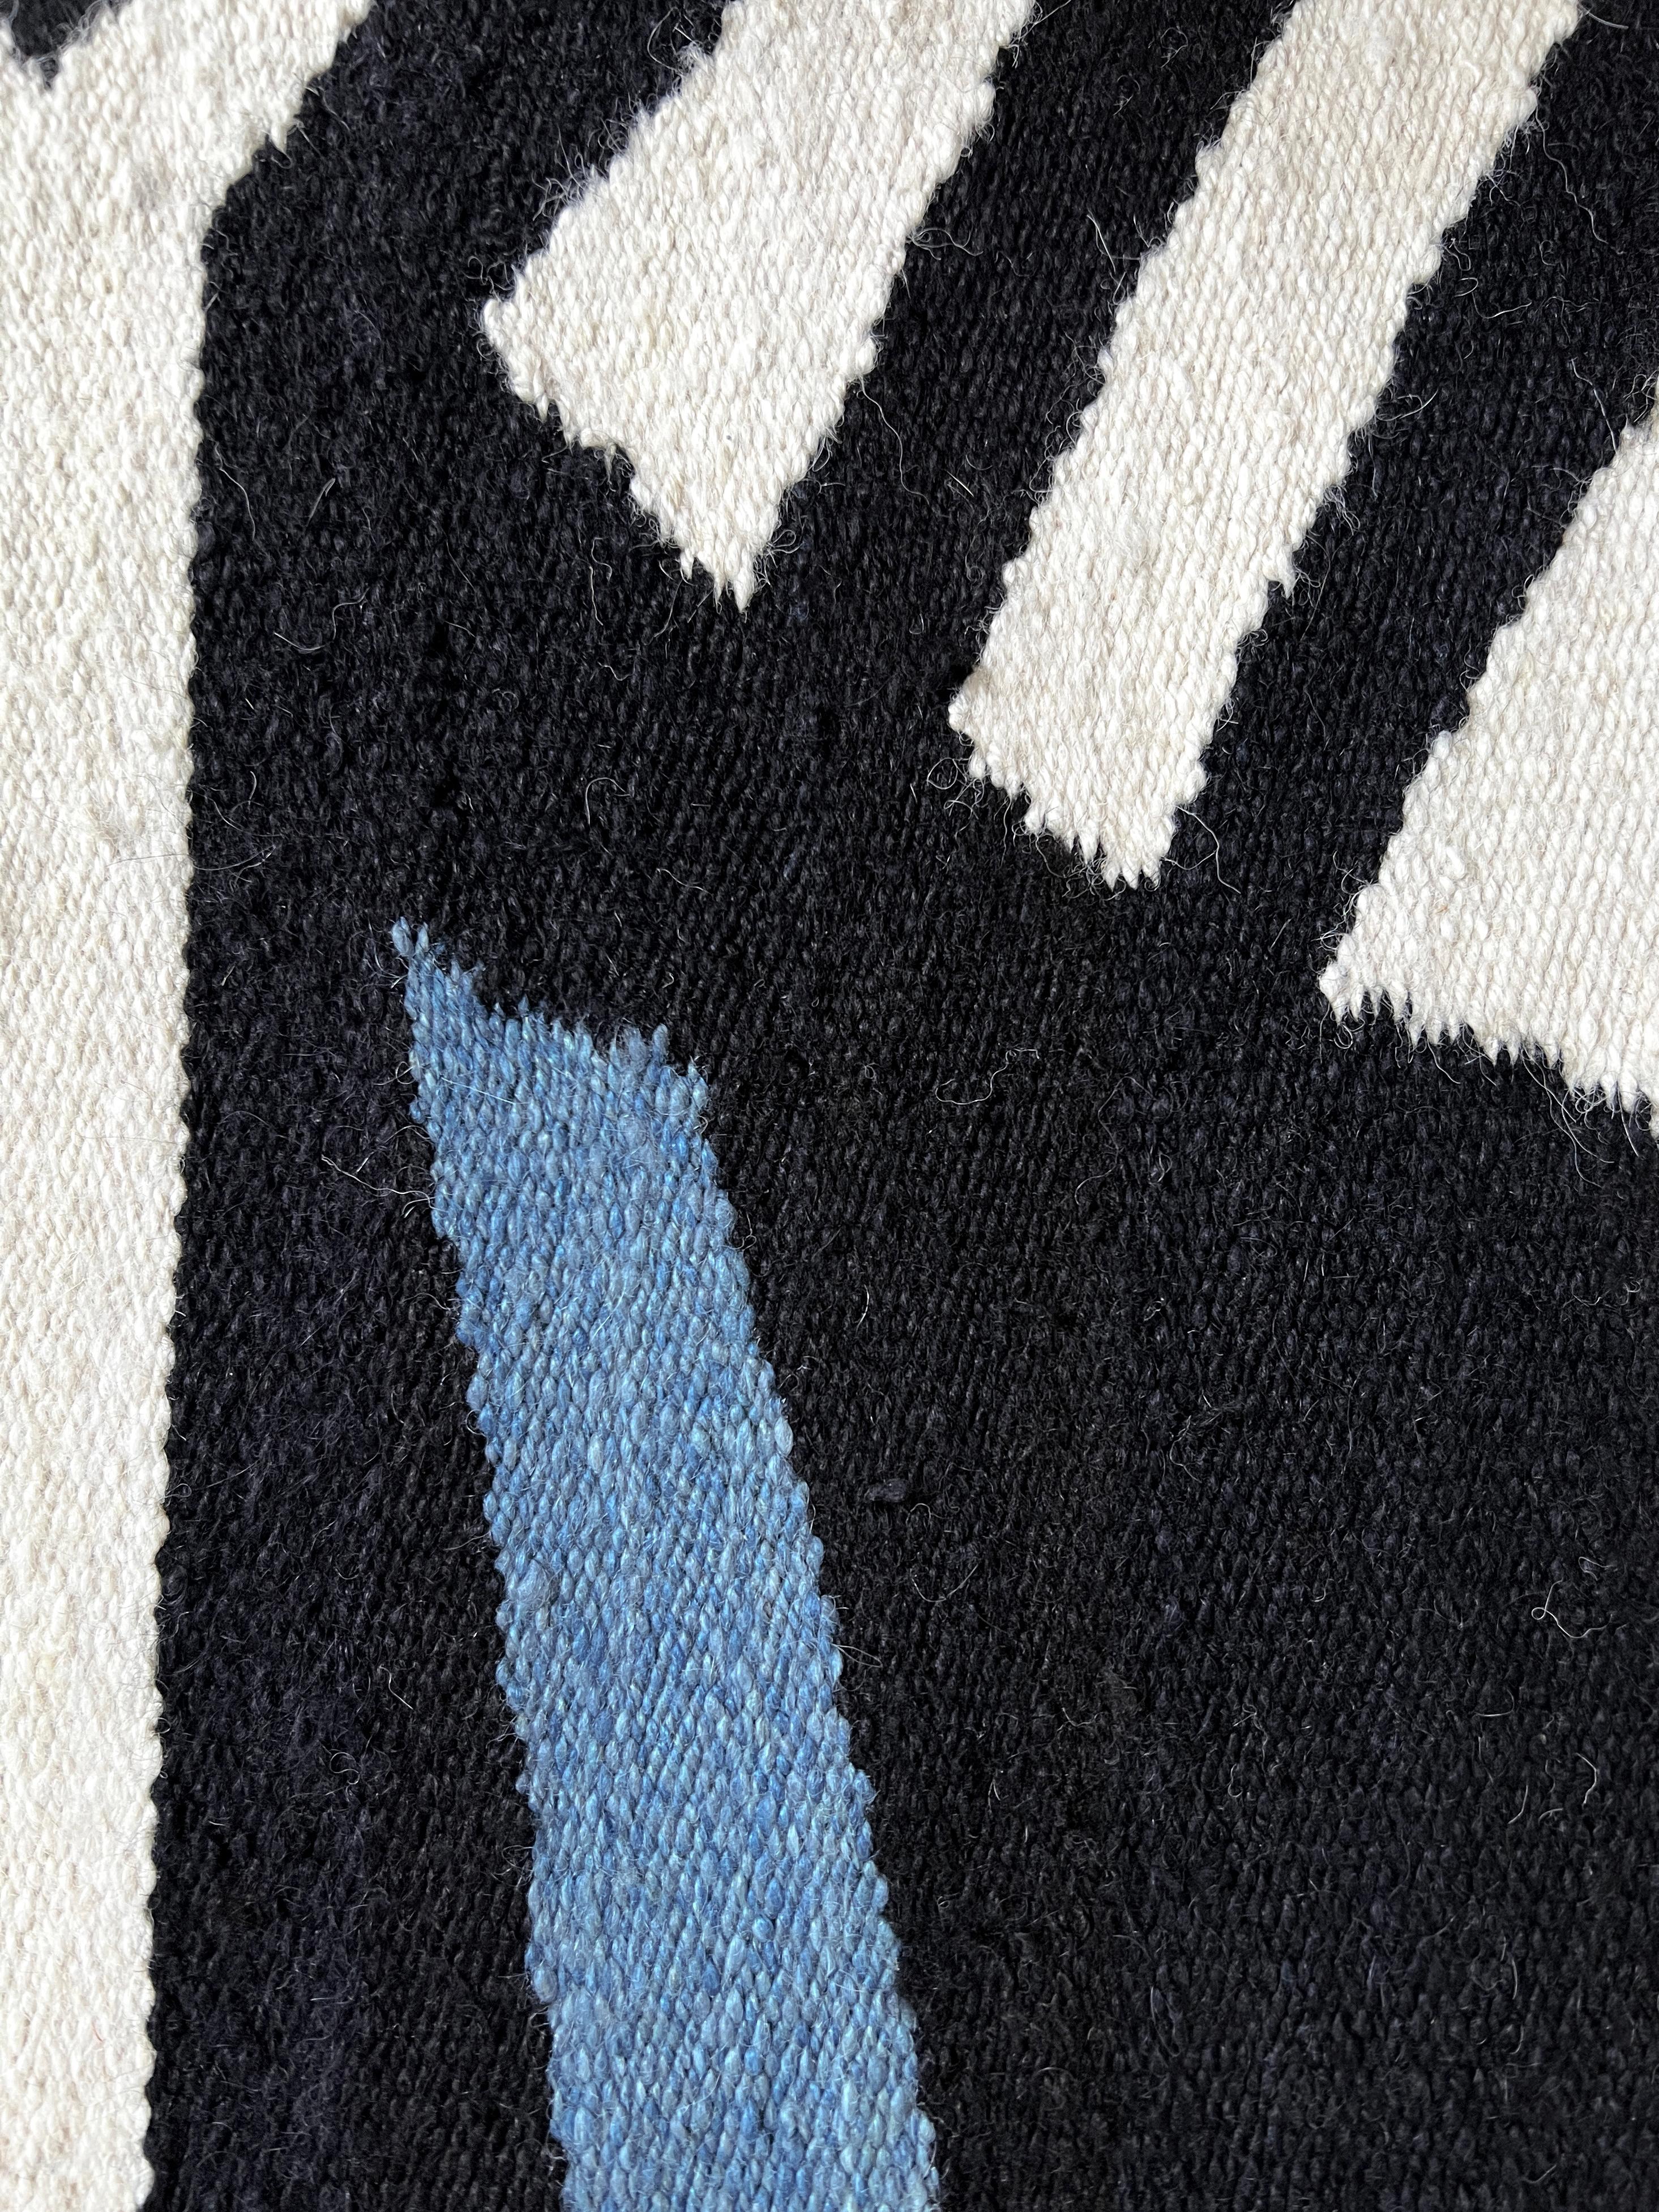 Adapted from the original artwork by Ary Brizzi, Untitled, 1958.

Limited edition of 15 handmade and unique rugs.

LALANA RUGS is an applied arts initiative born from the desire to combine proposals by contemporary artists with traditional local